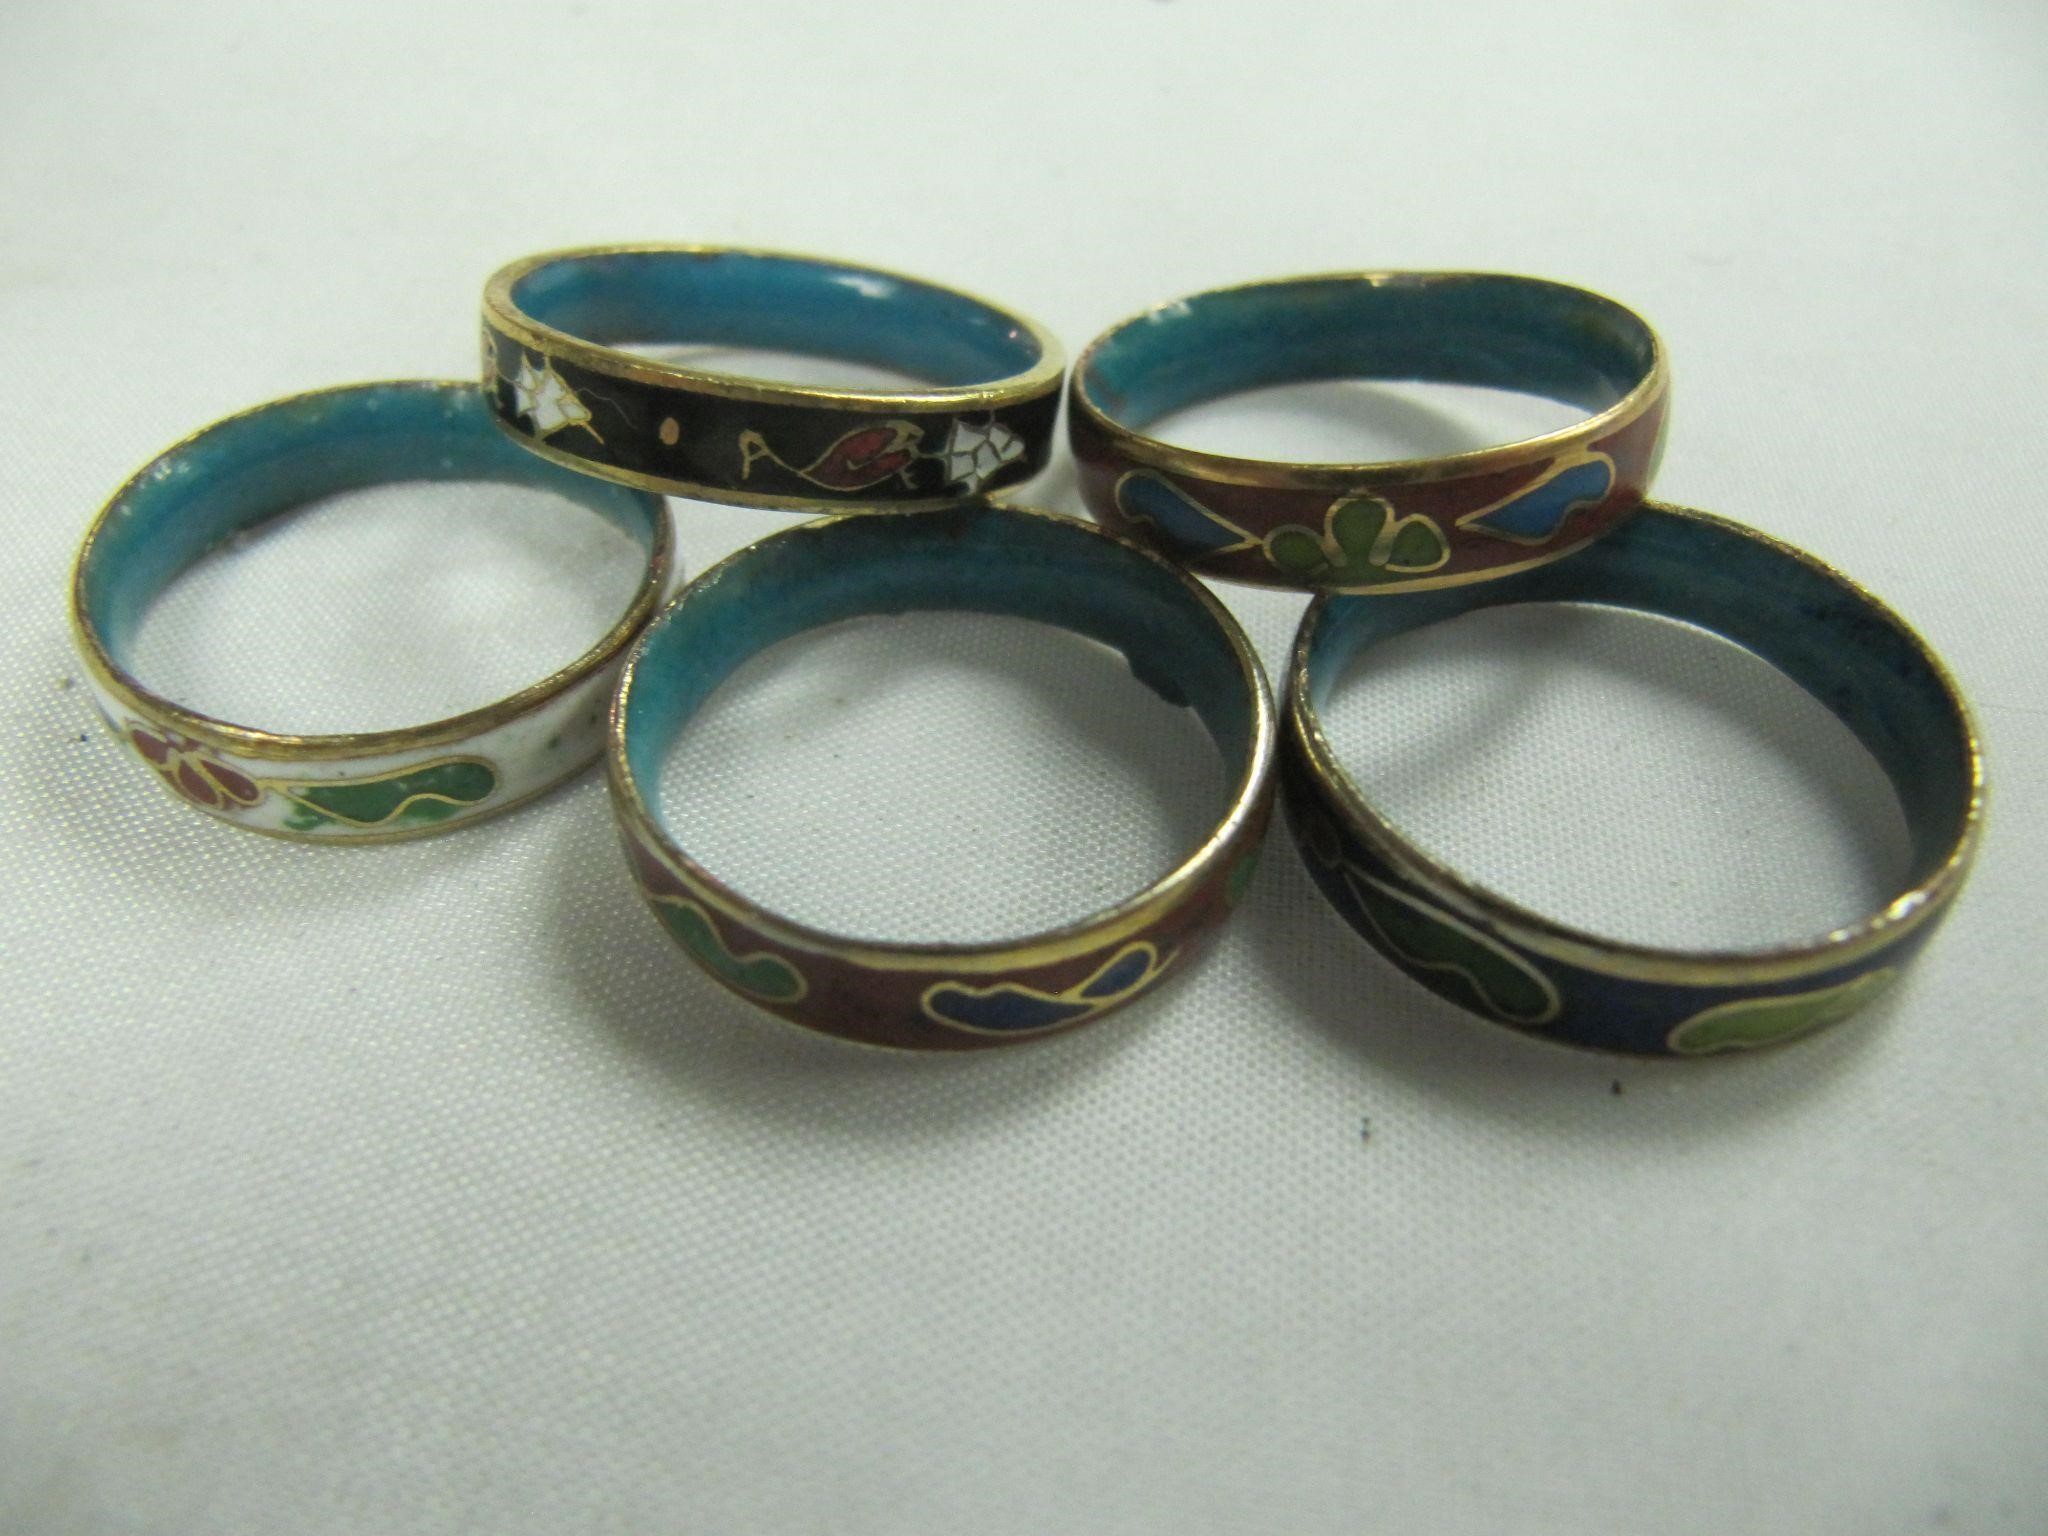 CLOISONNE TYPE RINGS